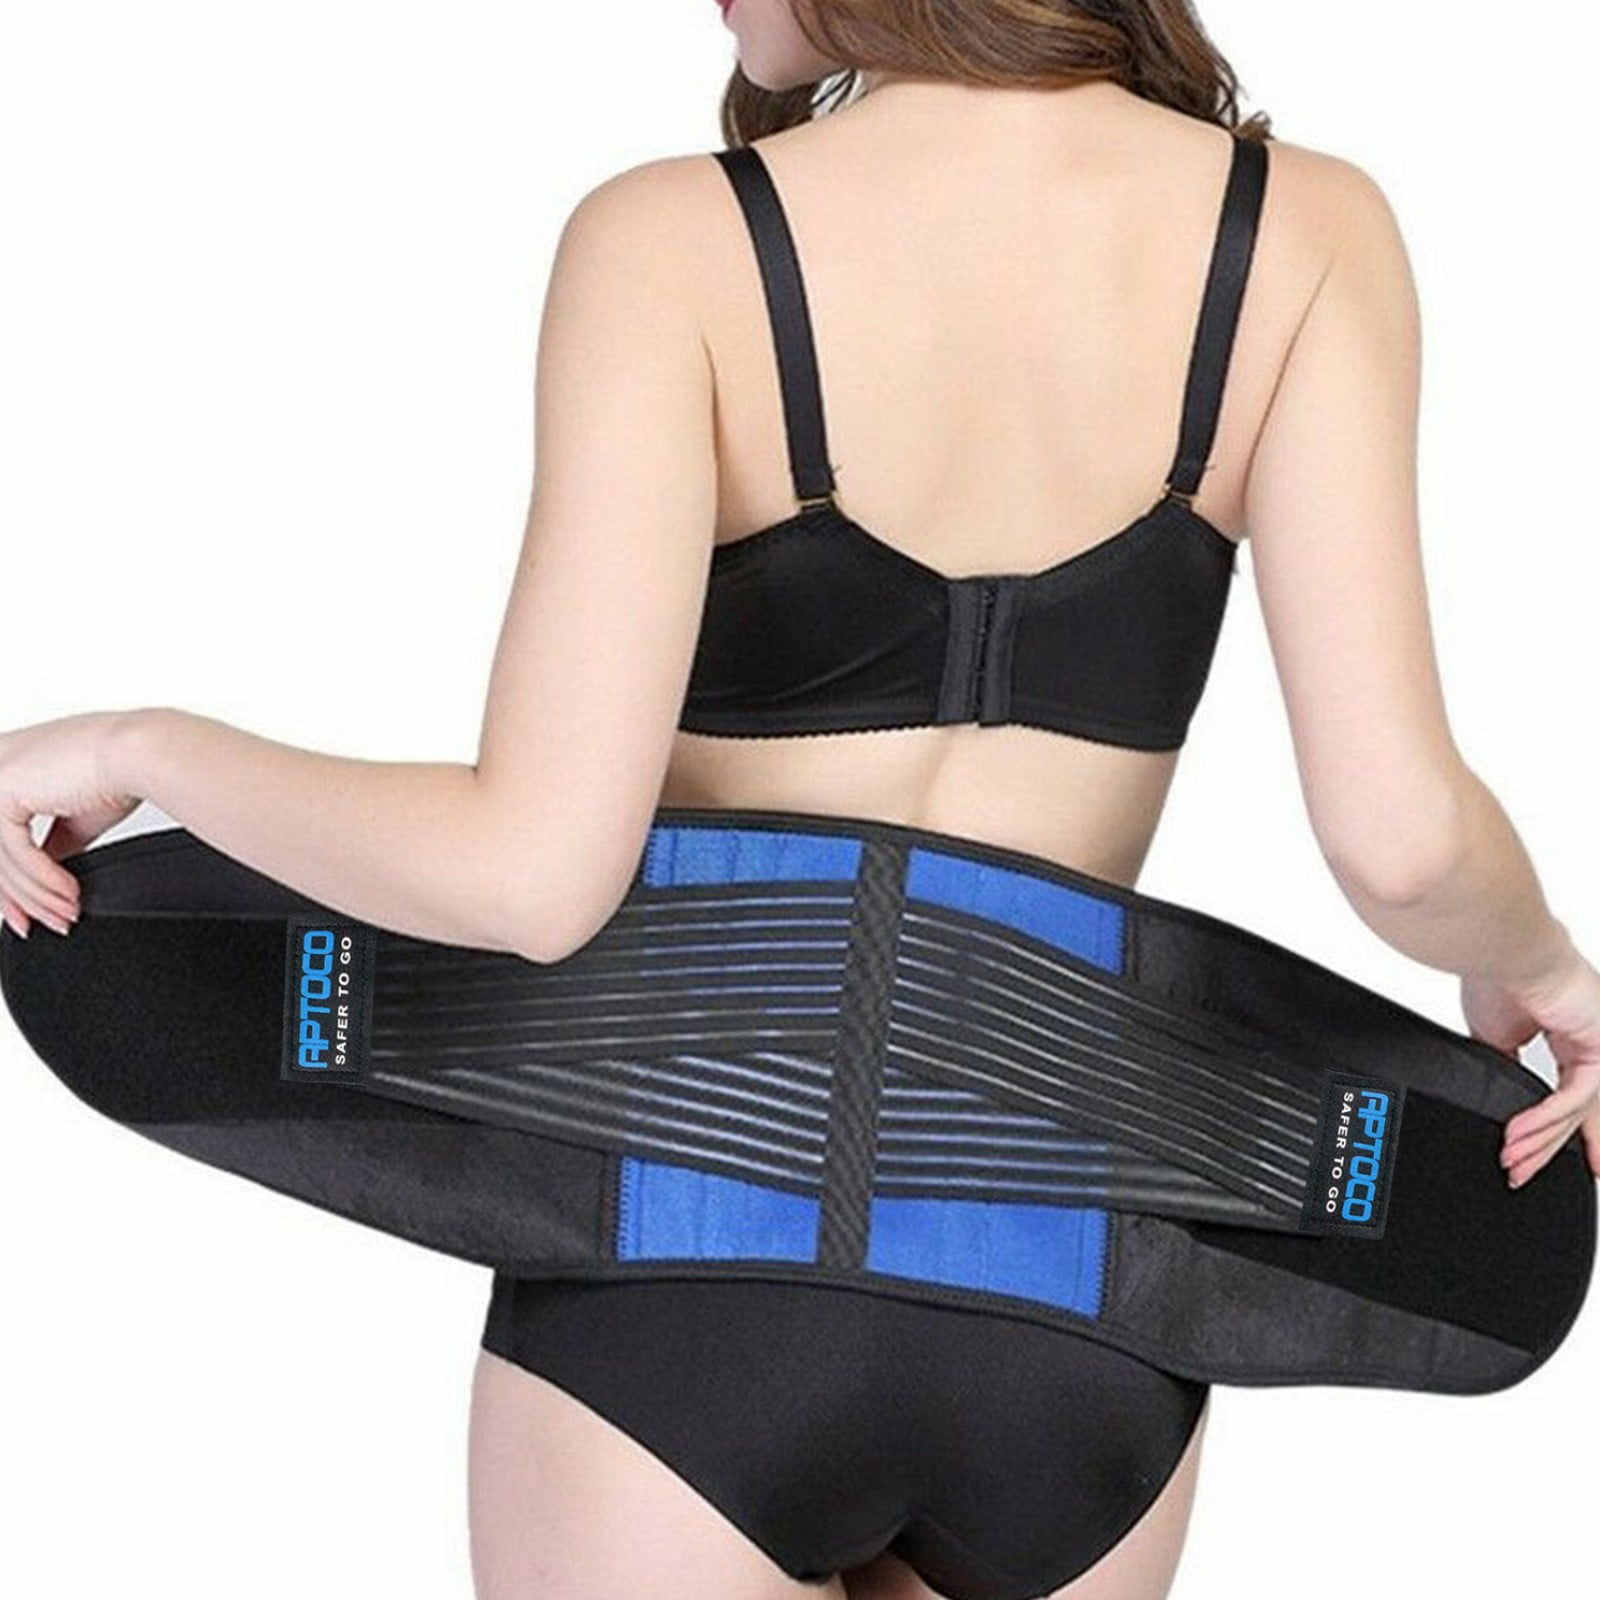 Lumbar Support Belt for Women and Men with 12 Stays, Extra-Wide